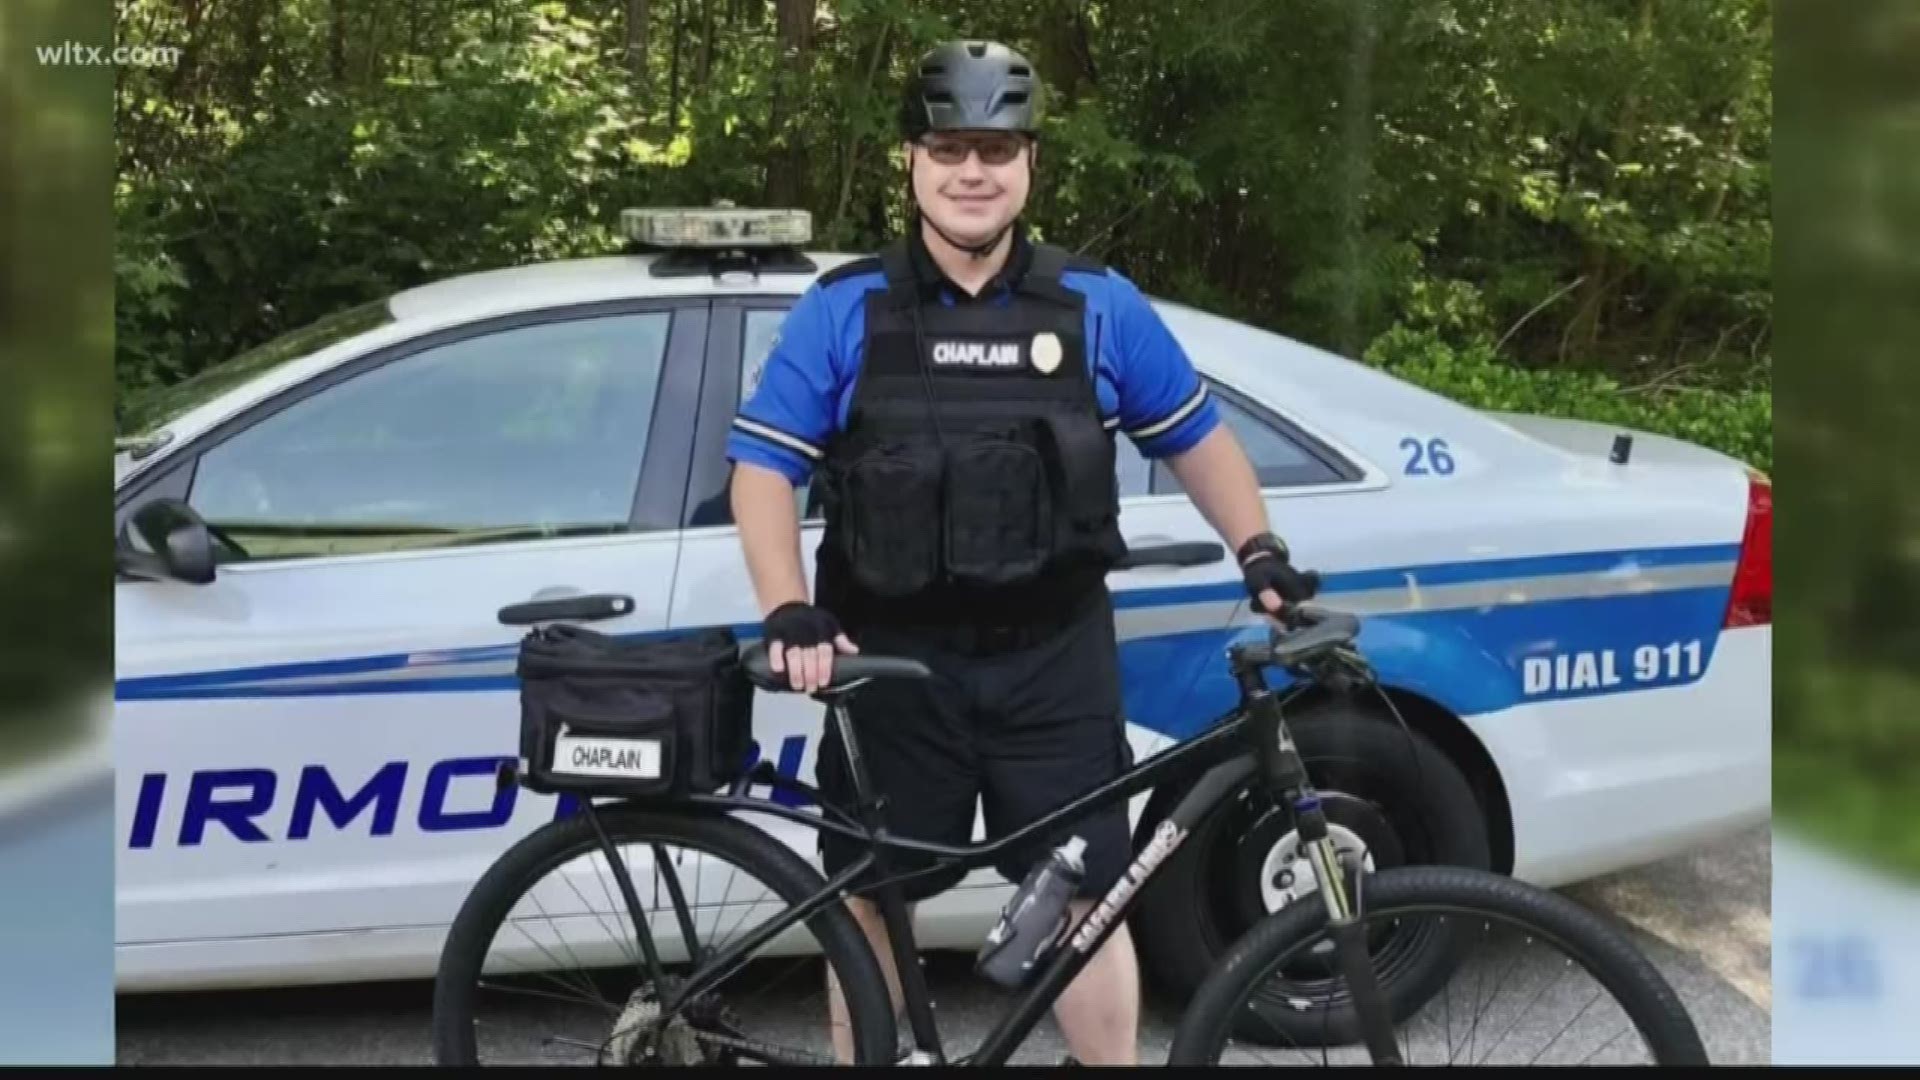 One Irmo PD officer is passionate about bike patrol and is working to show that at the SC Law Enforcement Officers Hall of Fame.